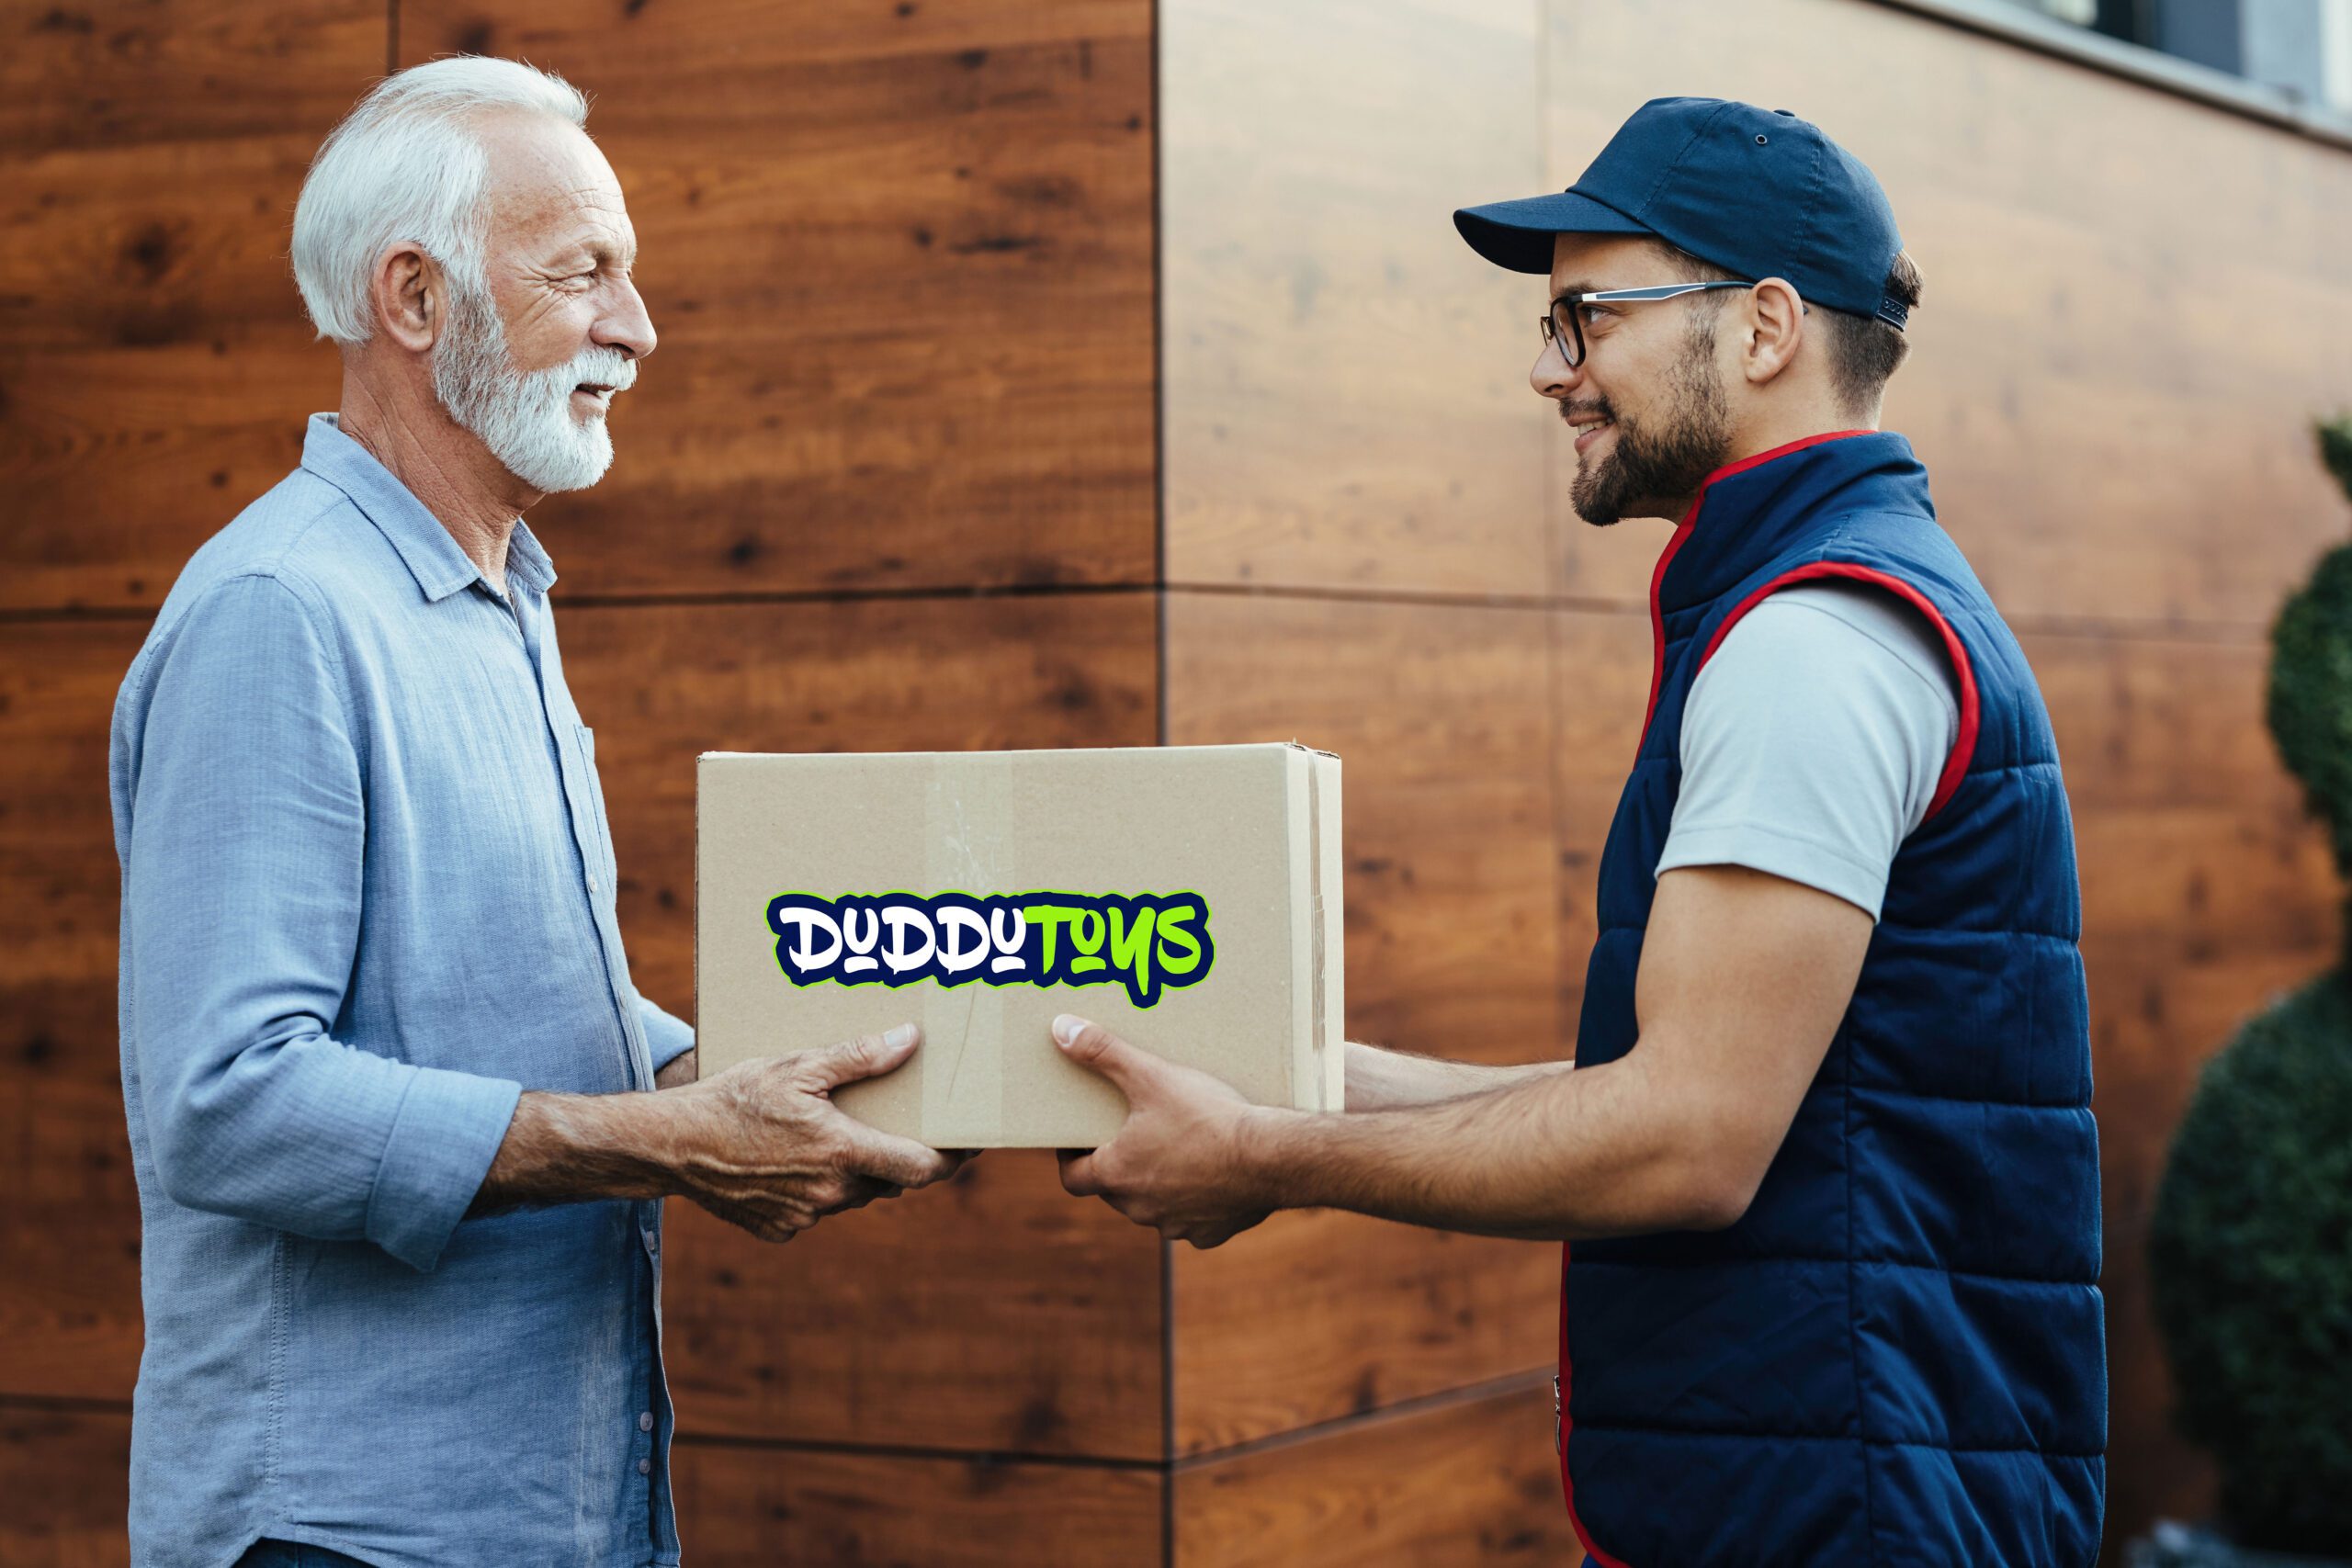 Duddutoys-delivery-man-client